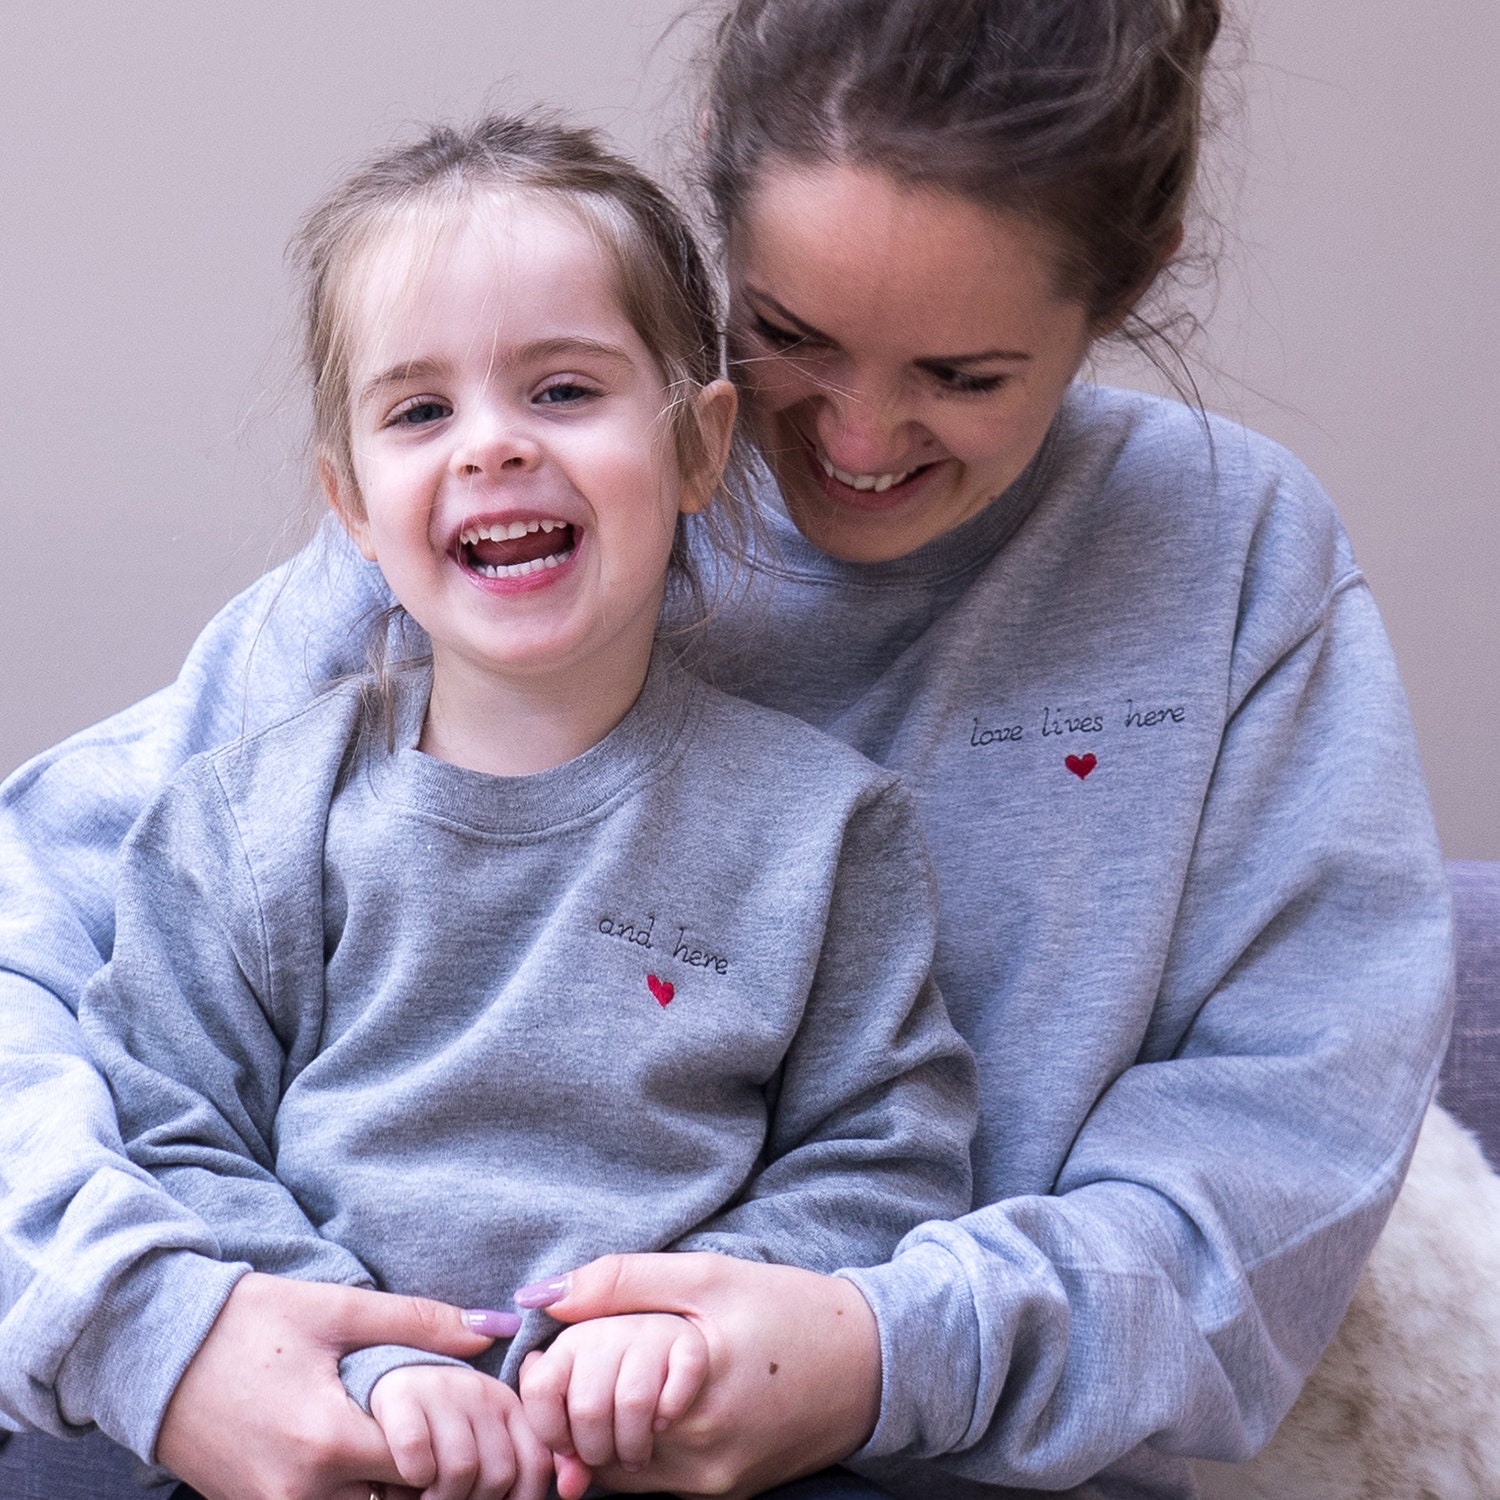 Love Lives Here Jumper Set - Mummy & Baby Matching Outfit Mum Daughter Jumpers Me -Twinning